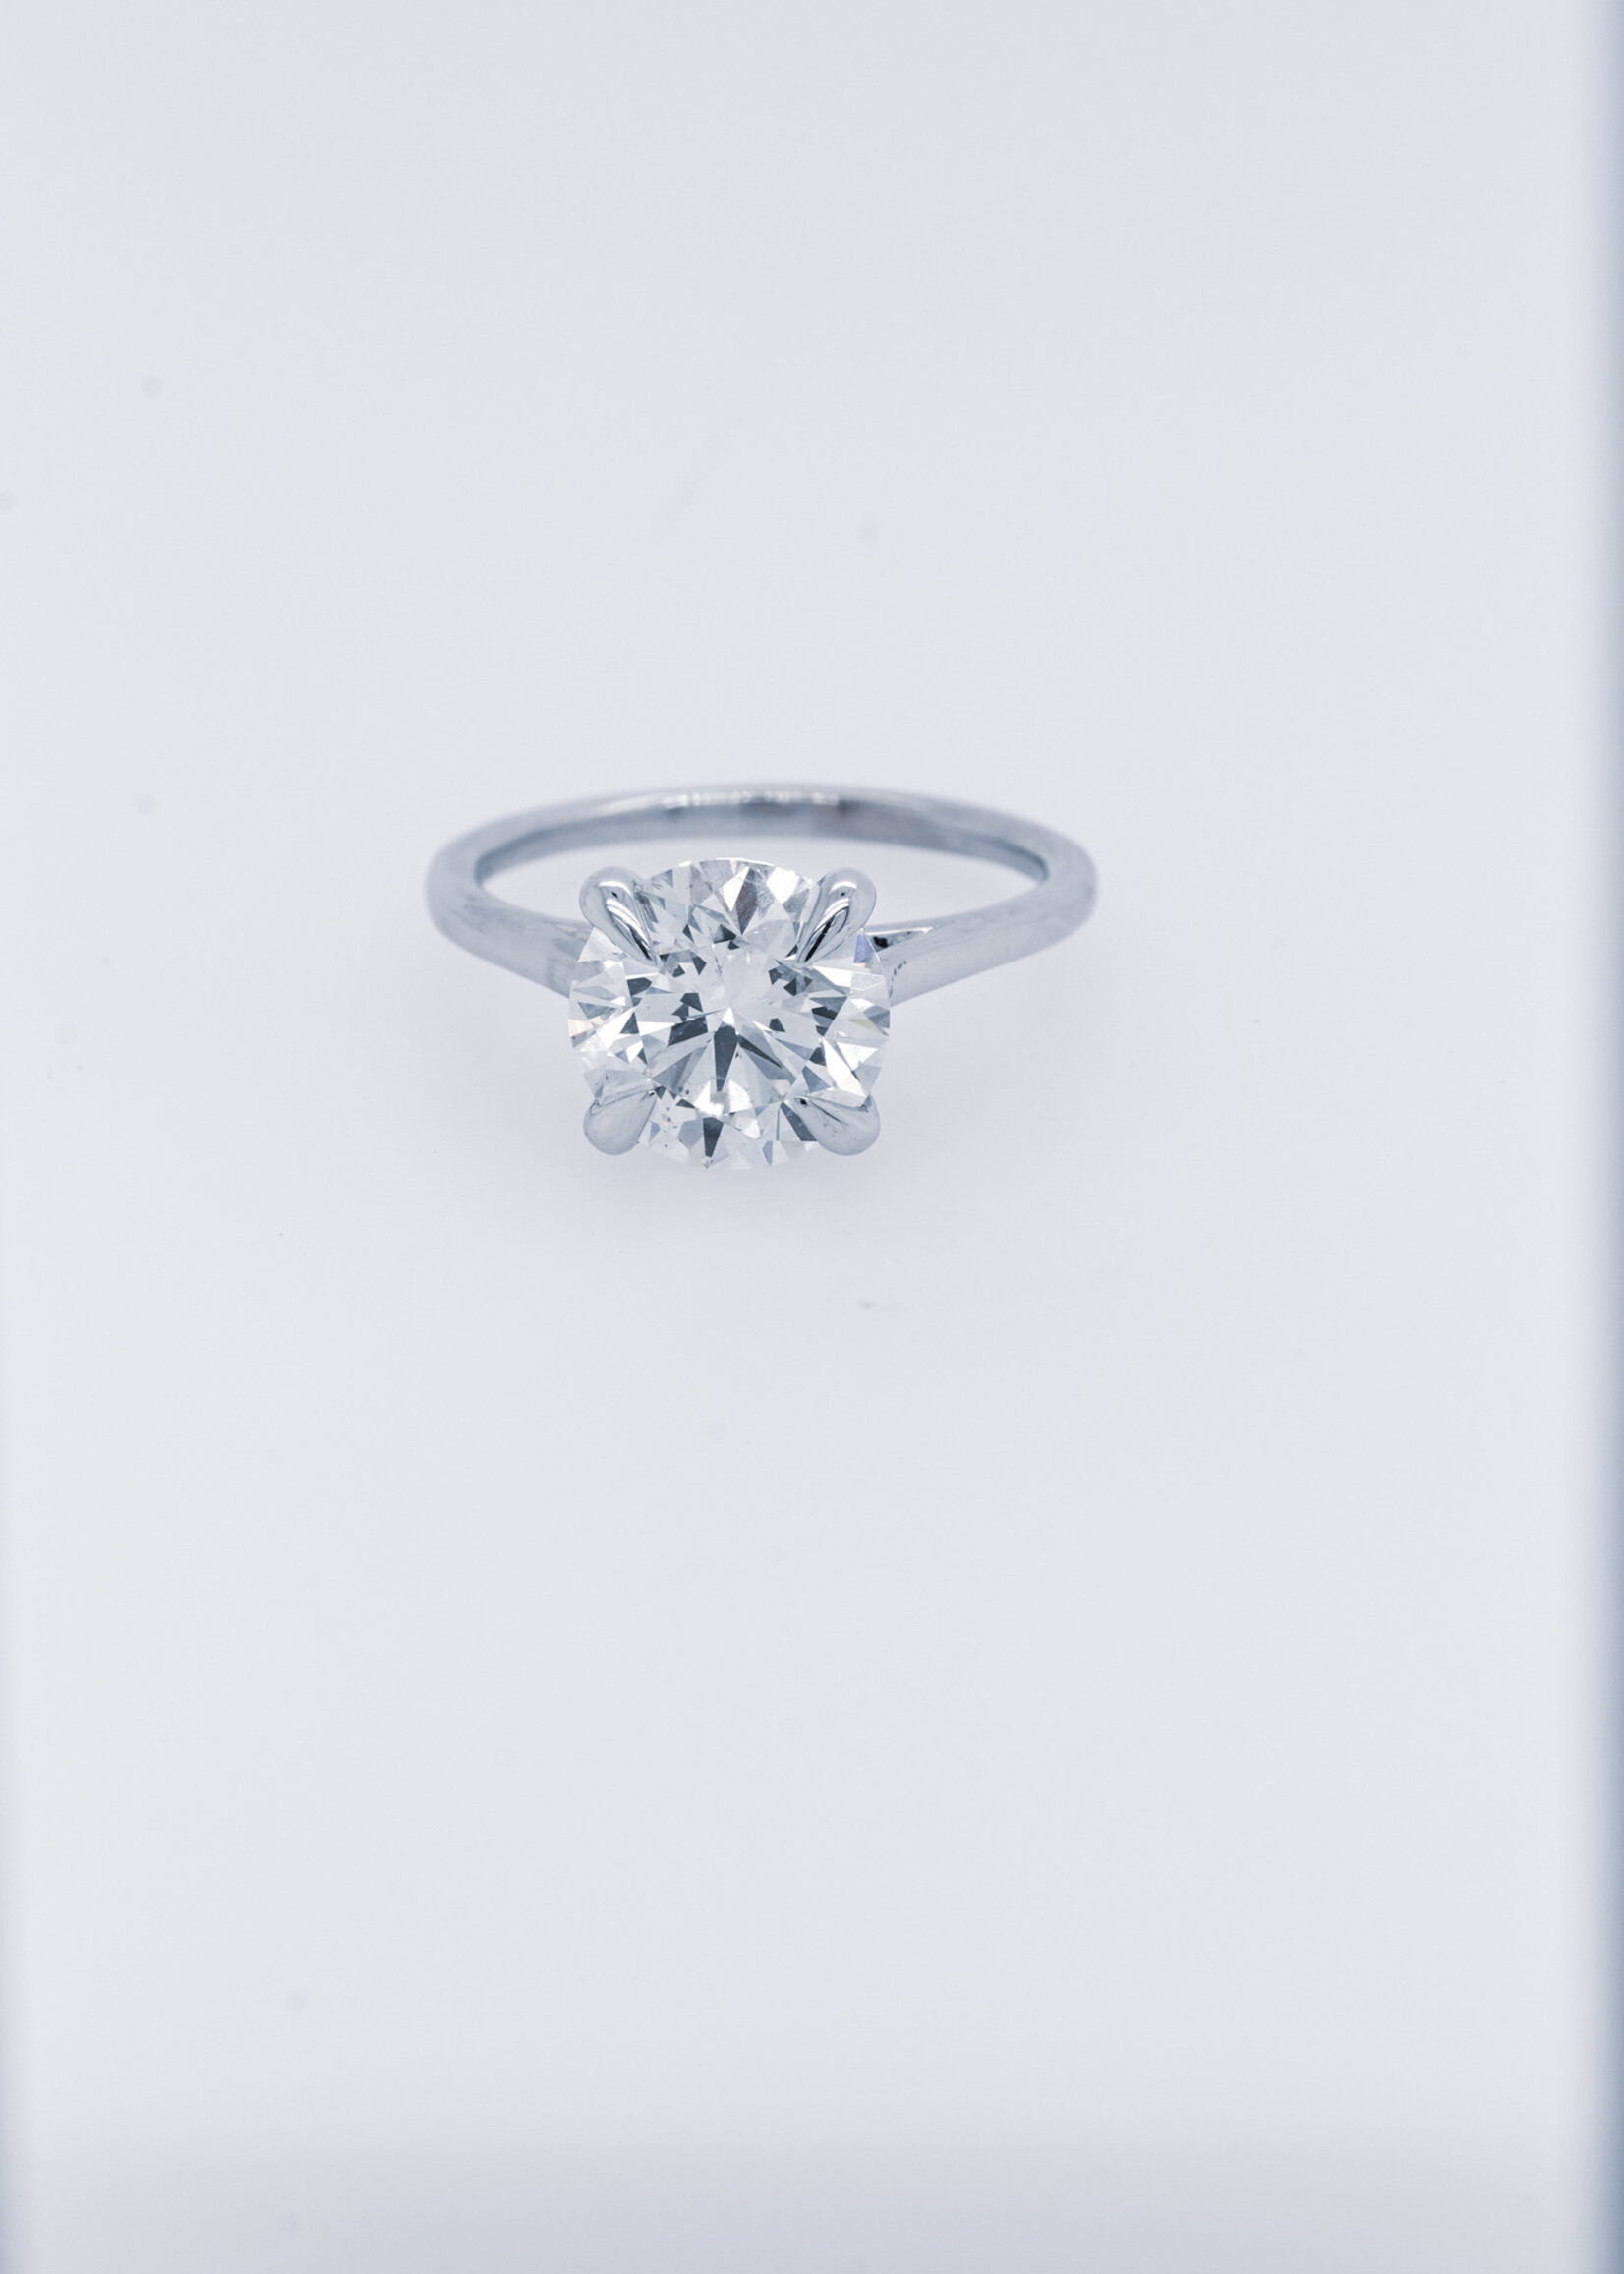 14KW 3.53g 3.03ct I/SI2 Round Diamond Solitaire Engagement Ring (size 6.5)